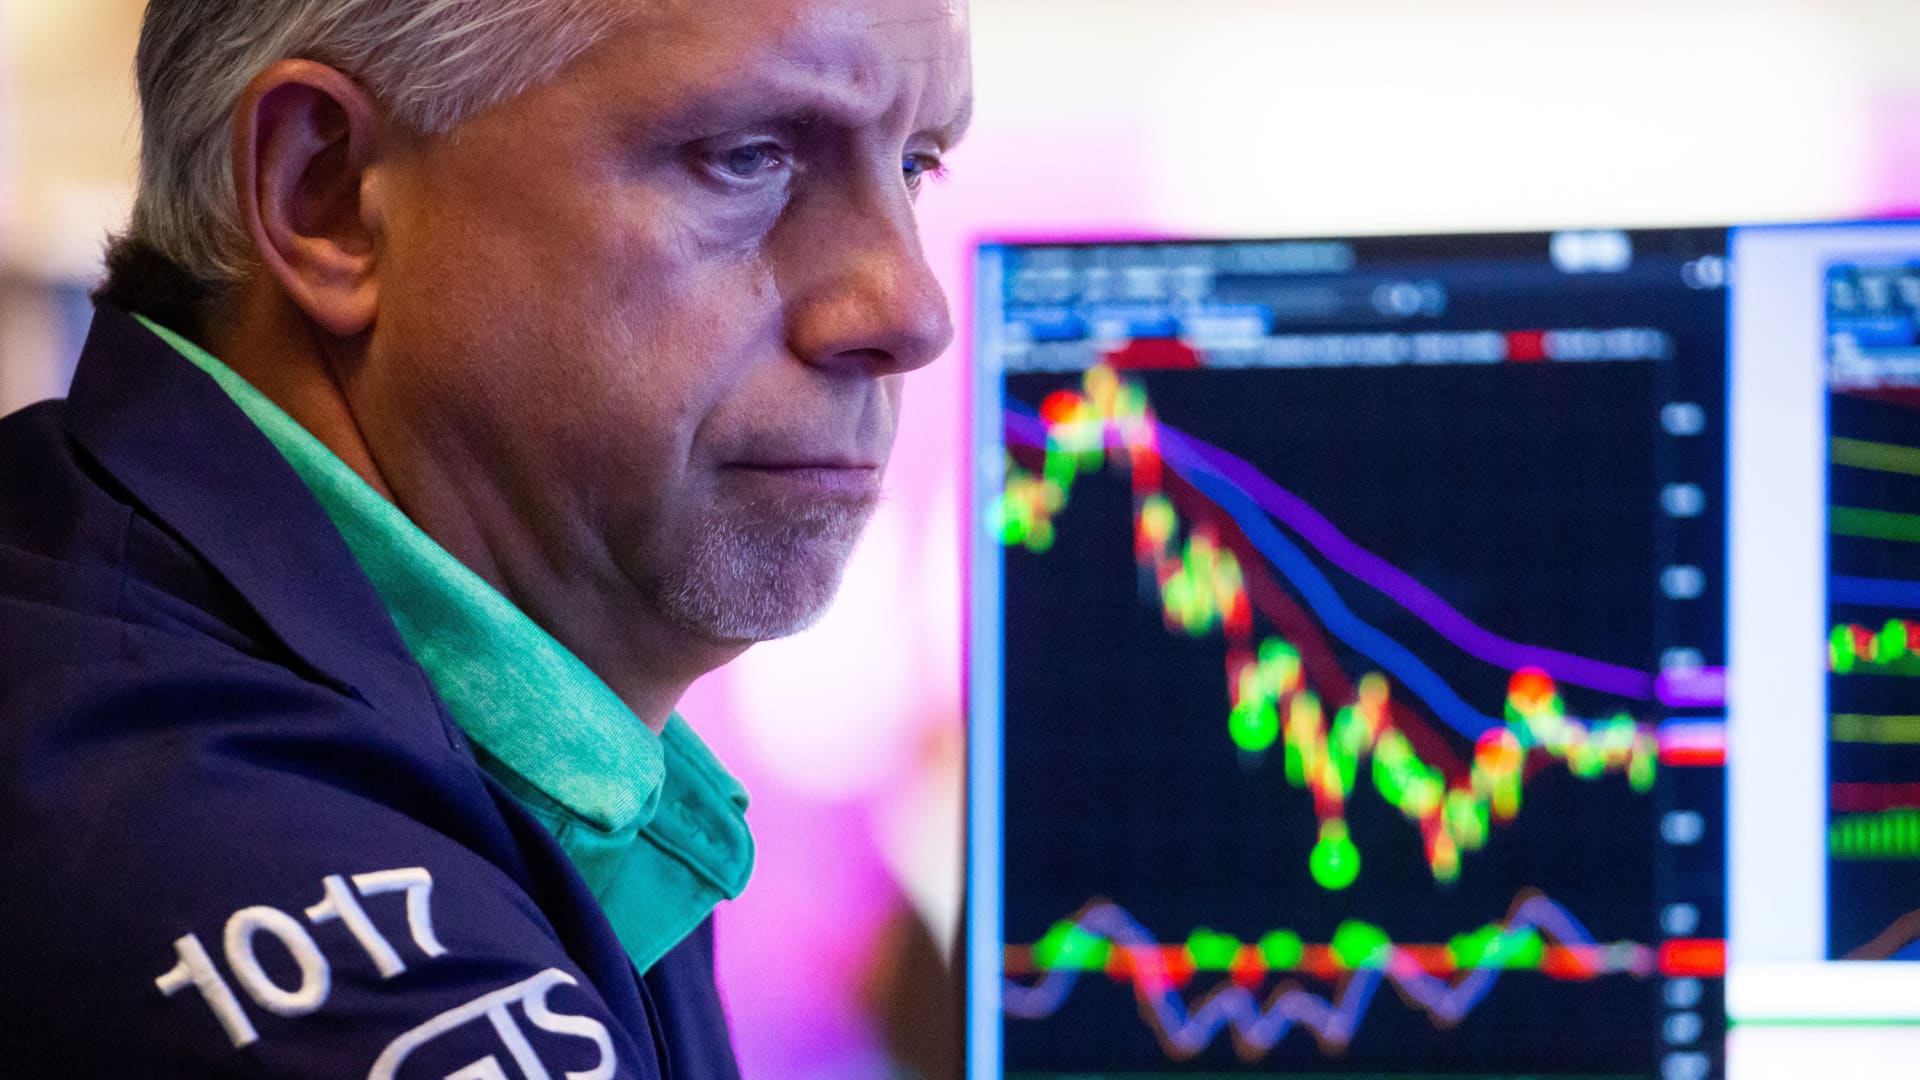 3 dividend-paying stocks with attractive charts as broader market struggles [Video]